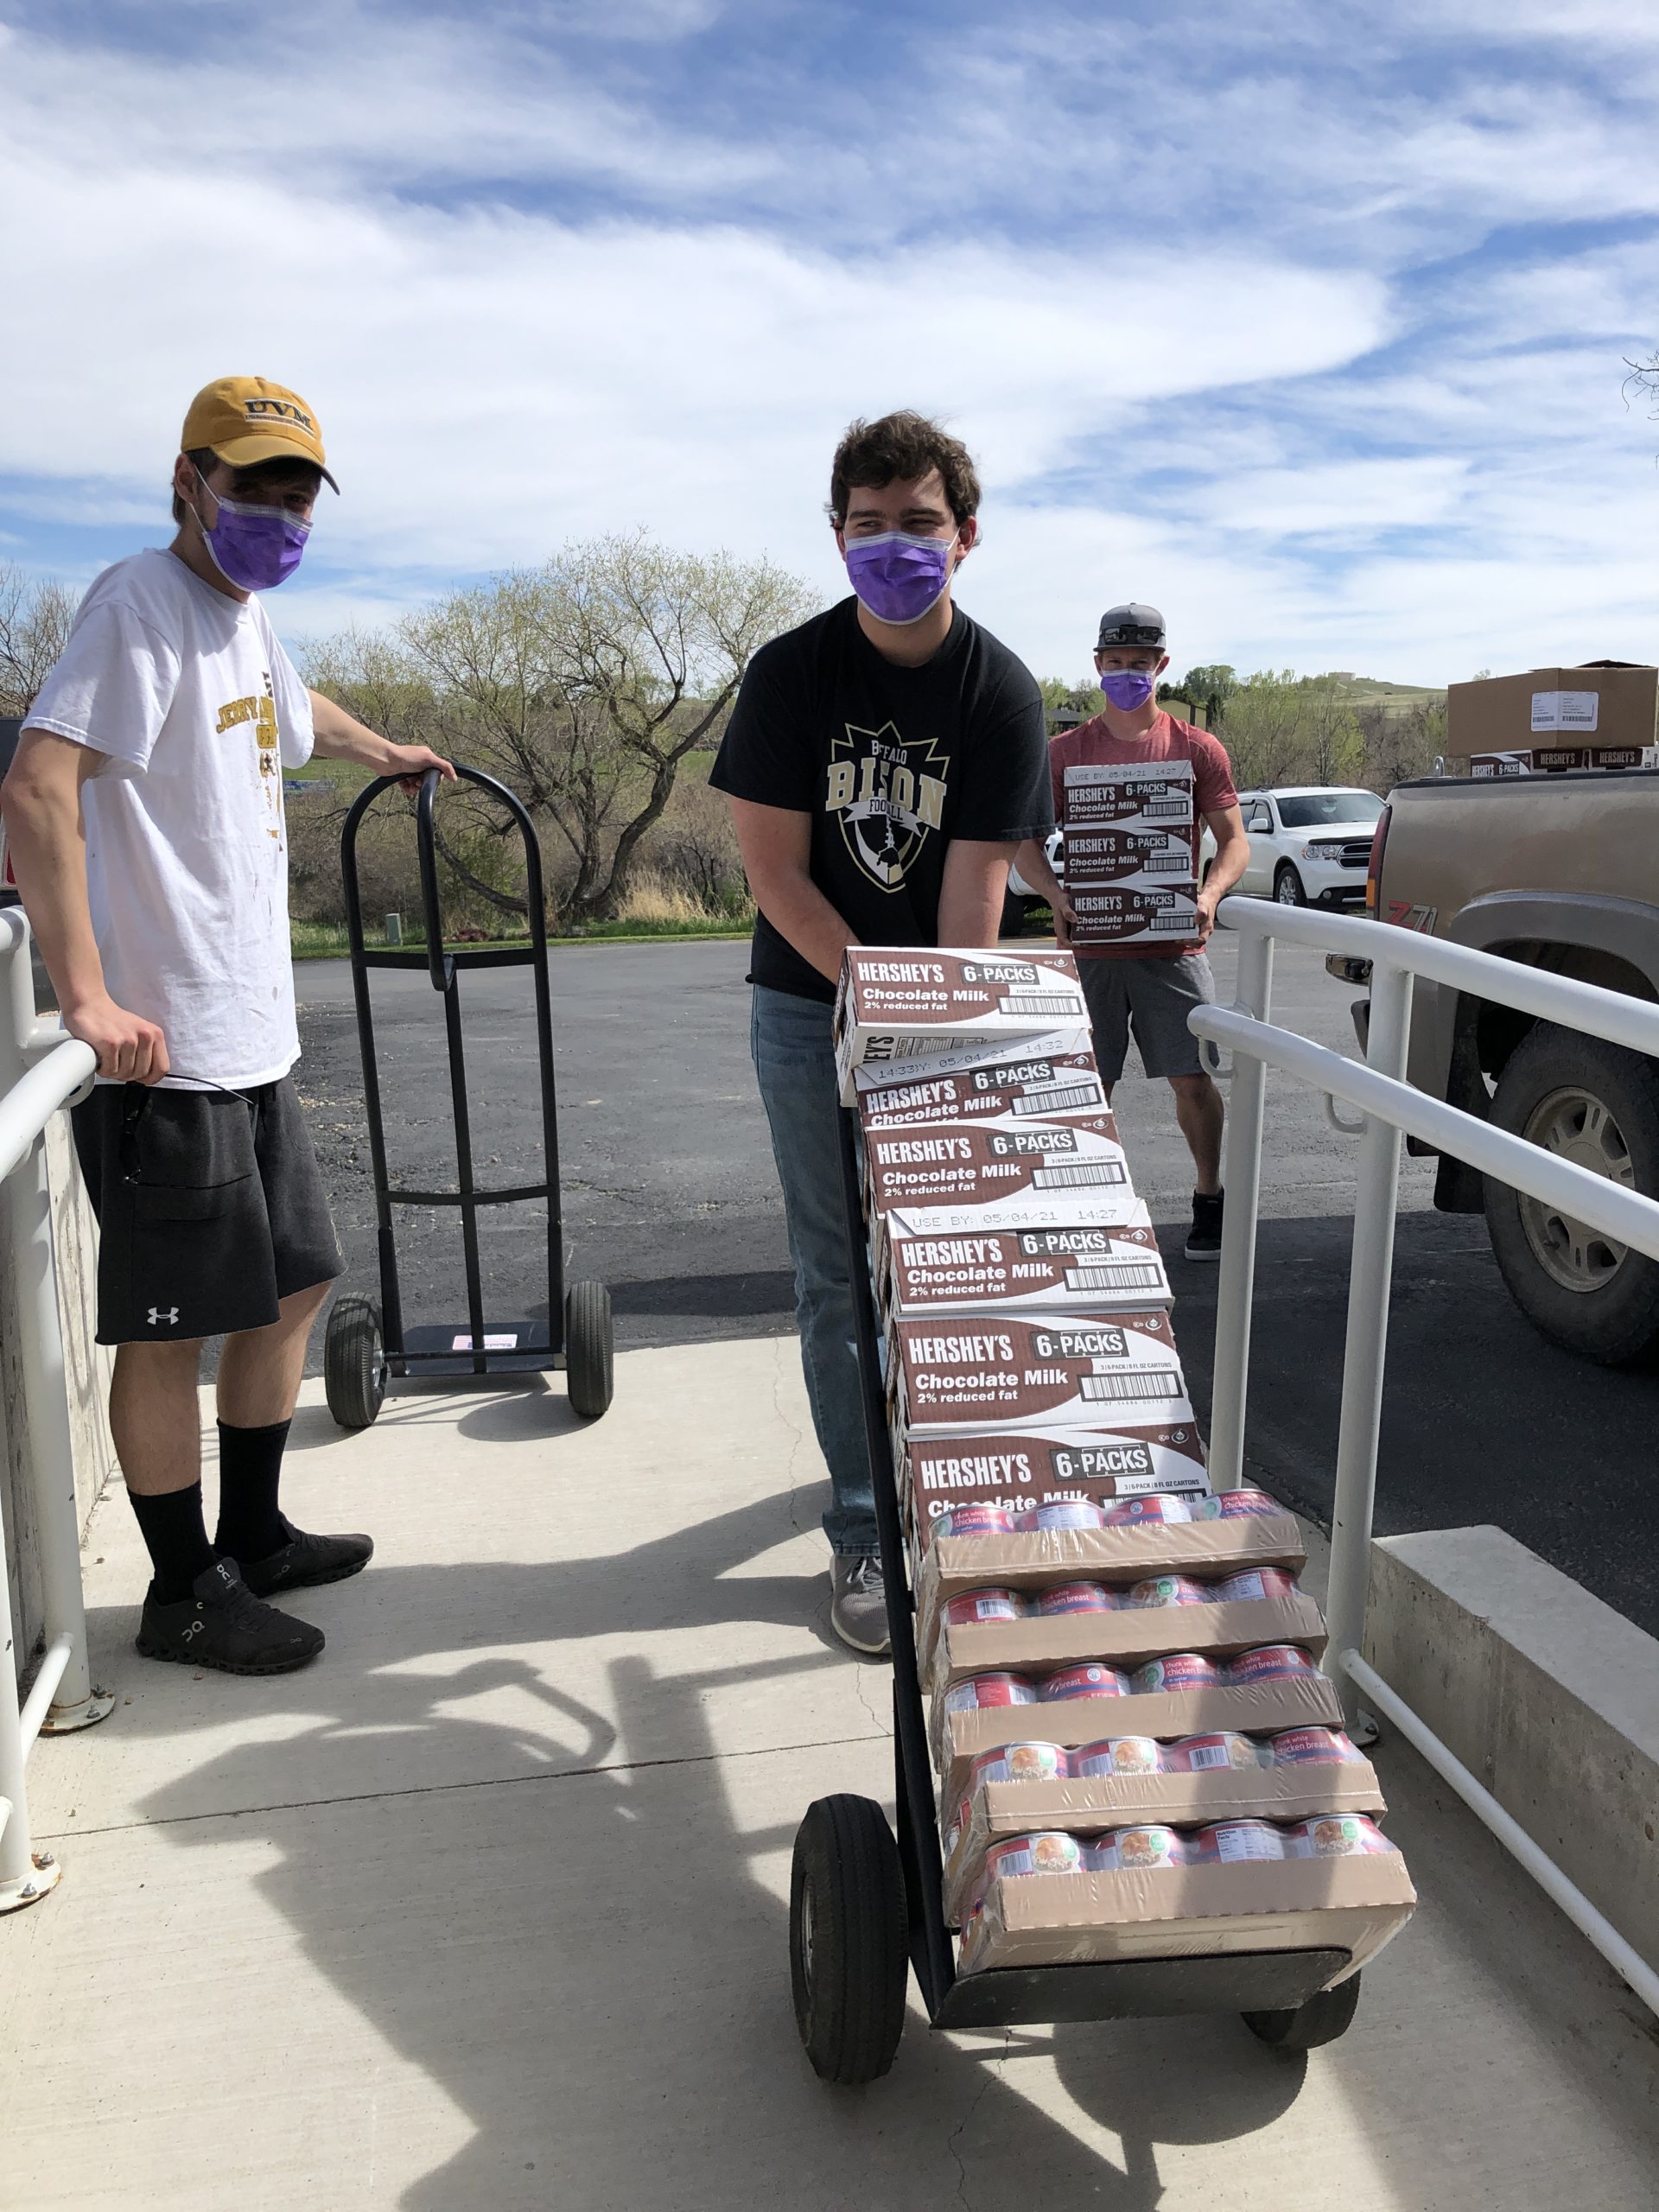 BHS National Honor Society students come through with transporting and stocking  JC-FFF food supplies